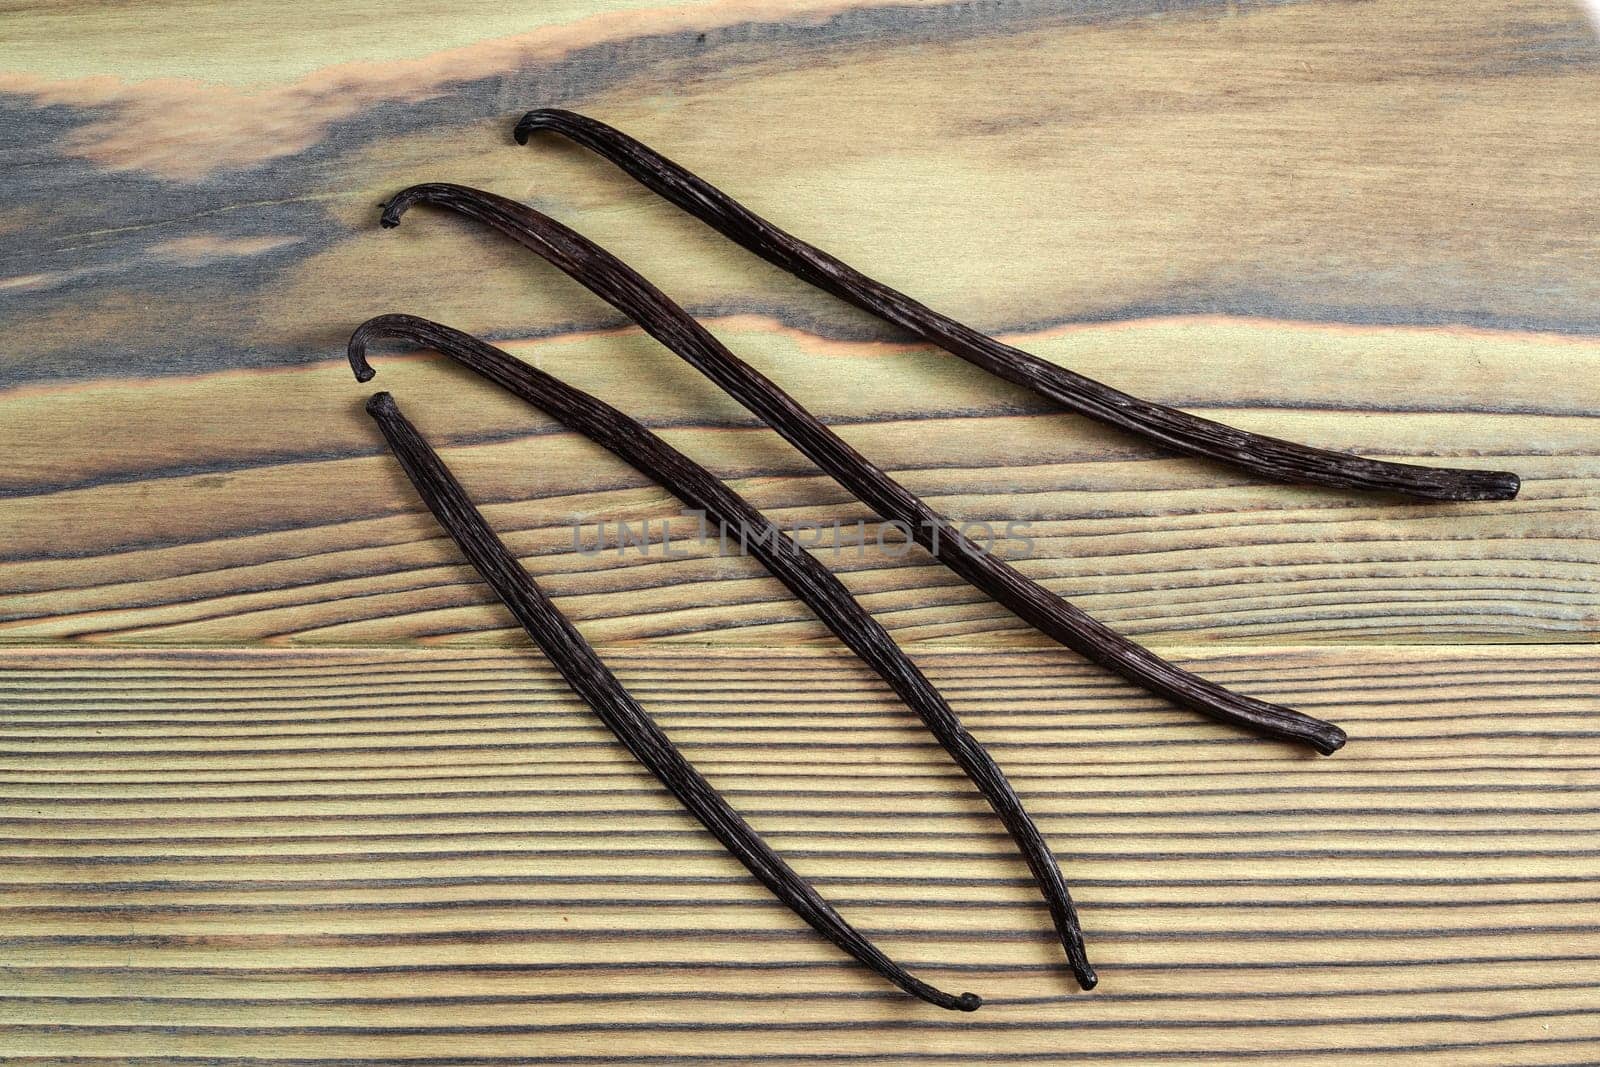 Four vanilla beans on wooden board, view from above by Ivanko